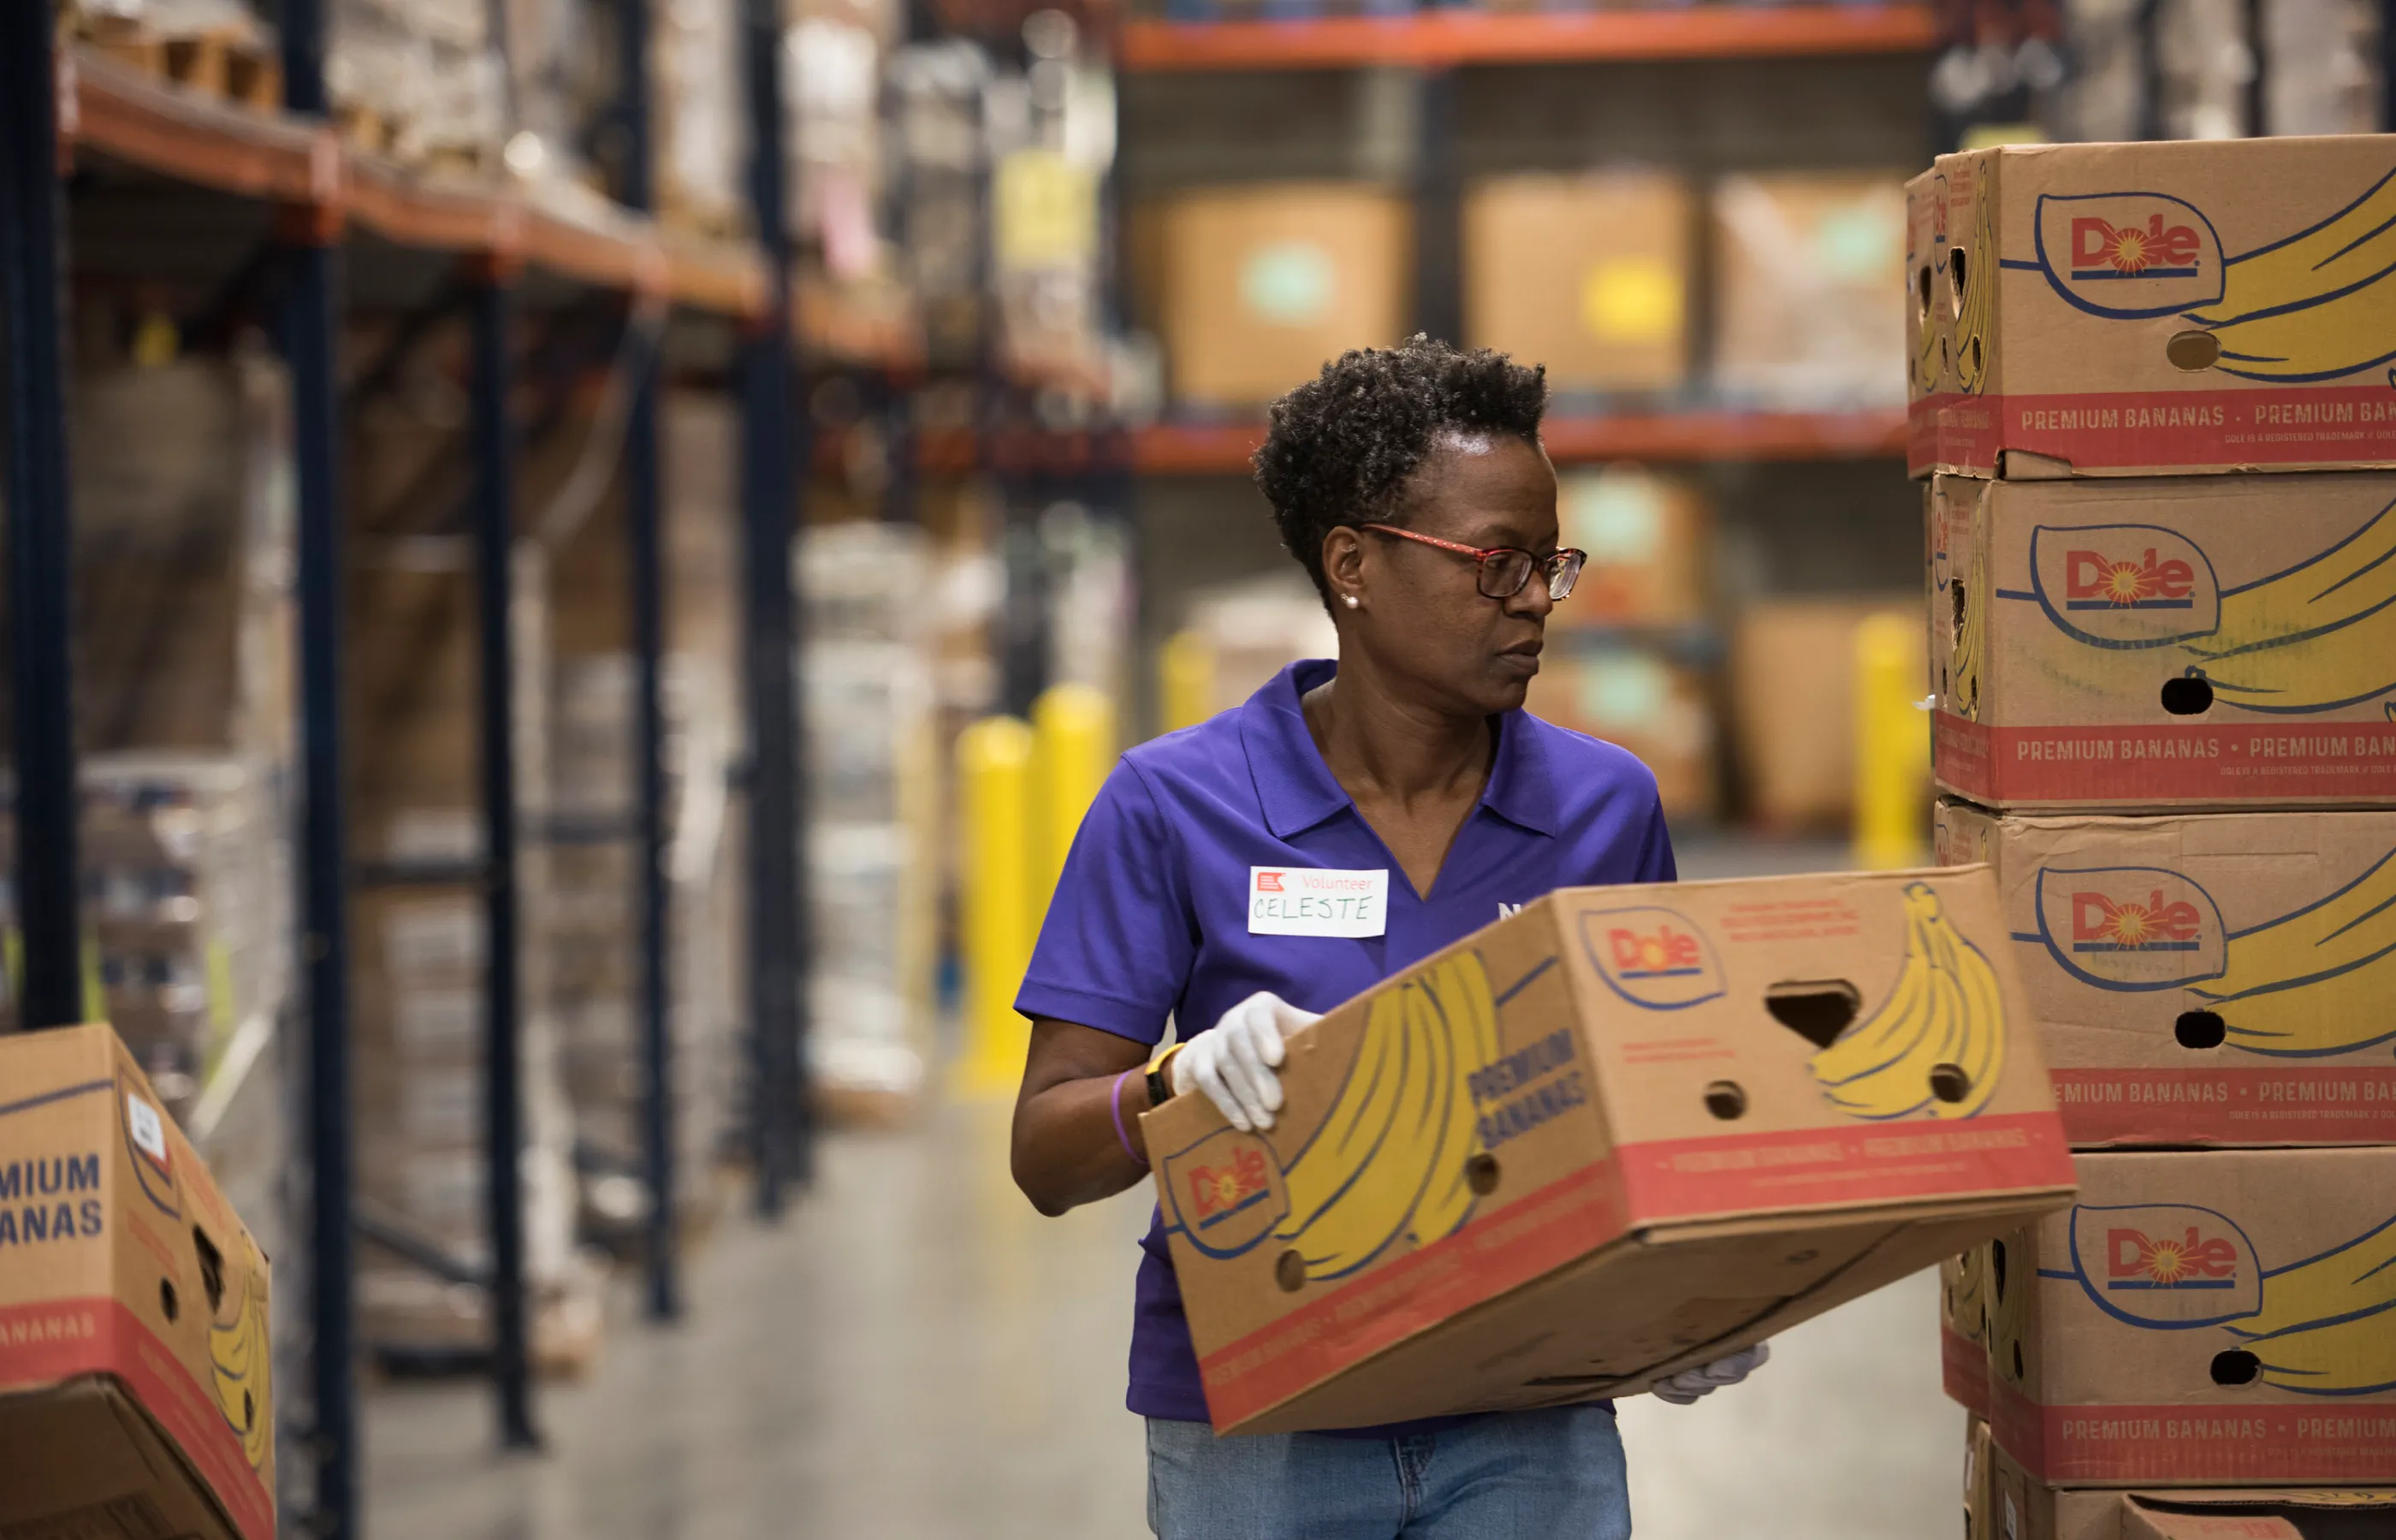 A woman is in a warehouse wearing a Novant Health shirt. She walks past a stack of boxes as she is carrying a Dole premium bananas box.